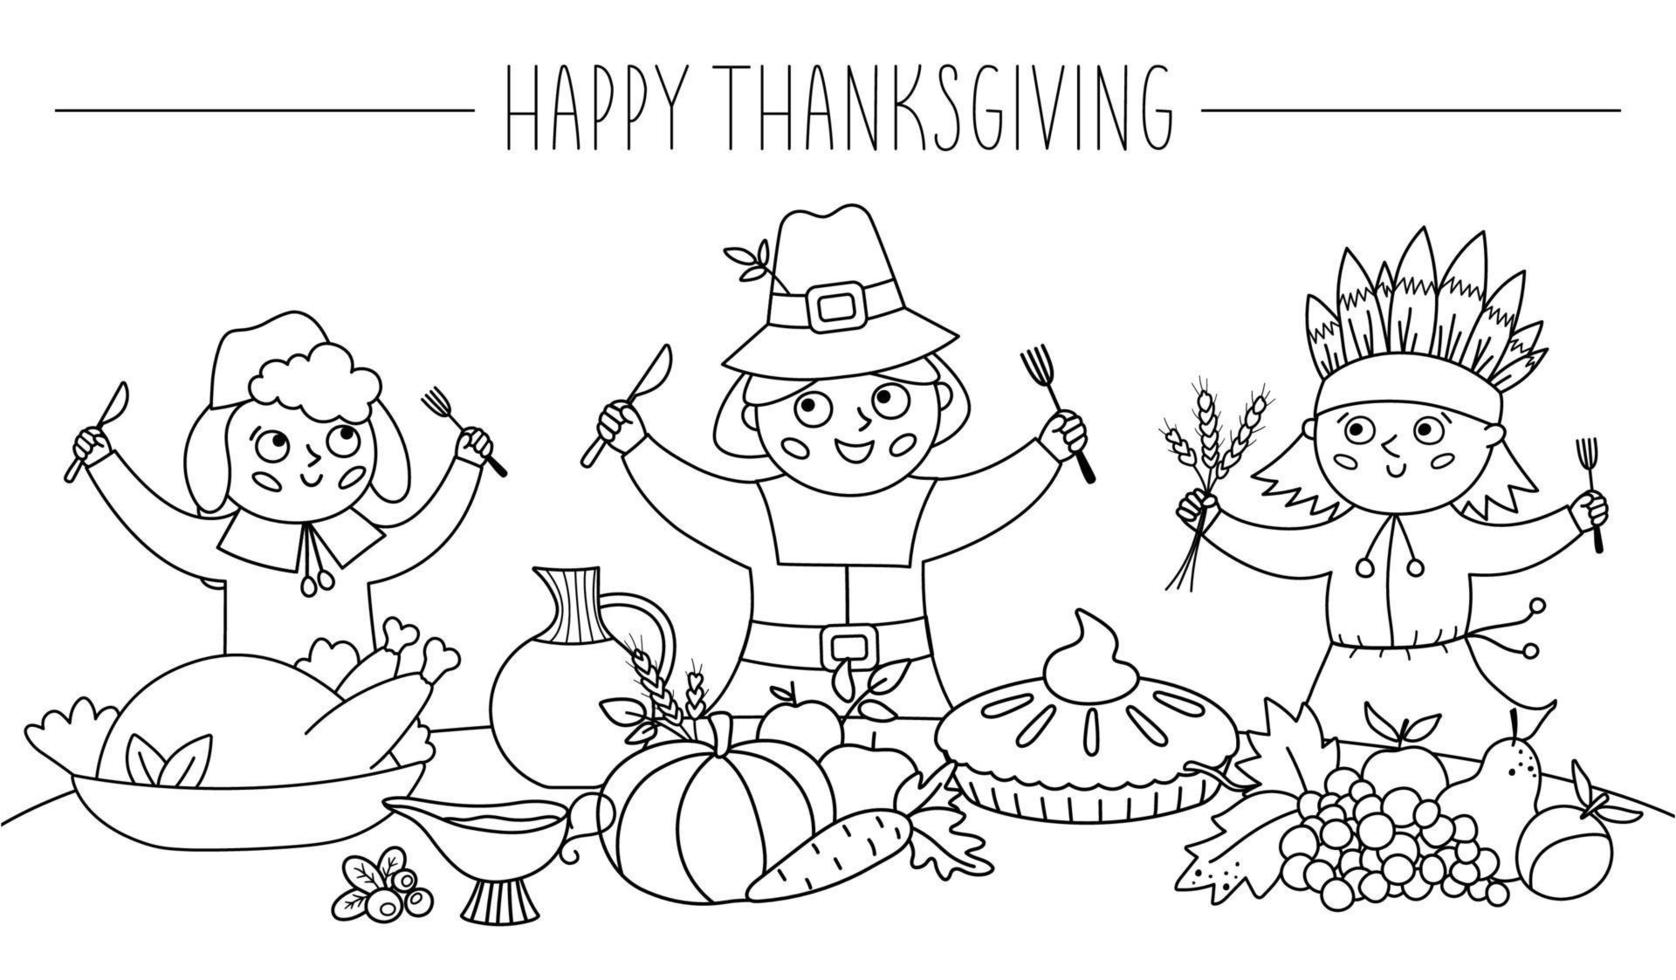 Happy black and white pilgrims and native American Indian give thanks for the food. Thanksgiving Day line characters and traditional holiday meal illustration. Vector outline autumn table scene